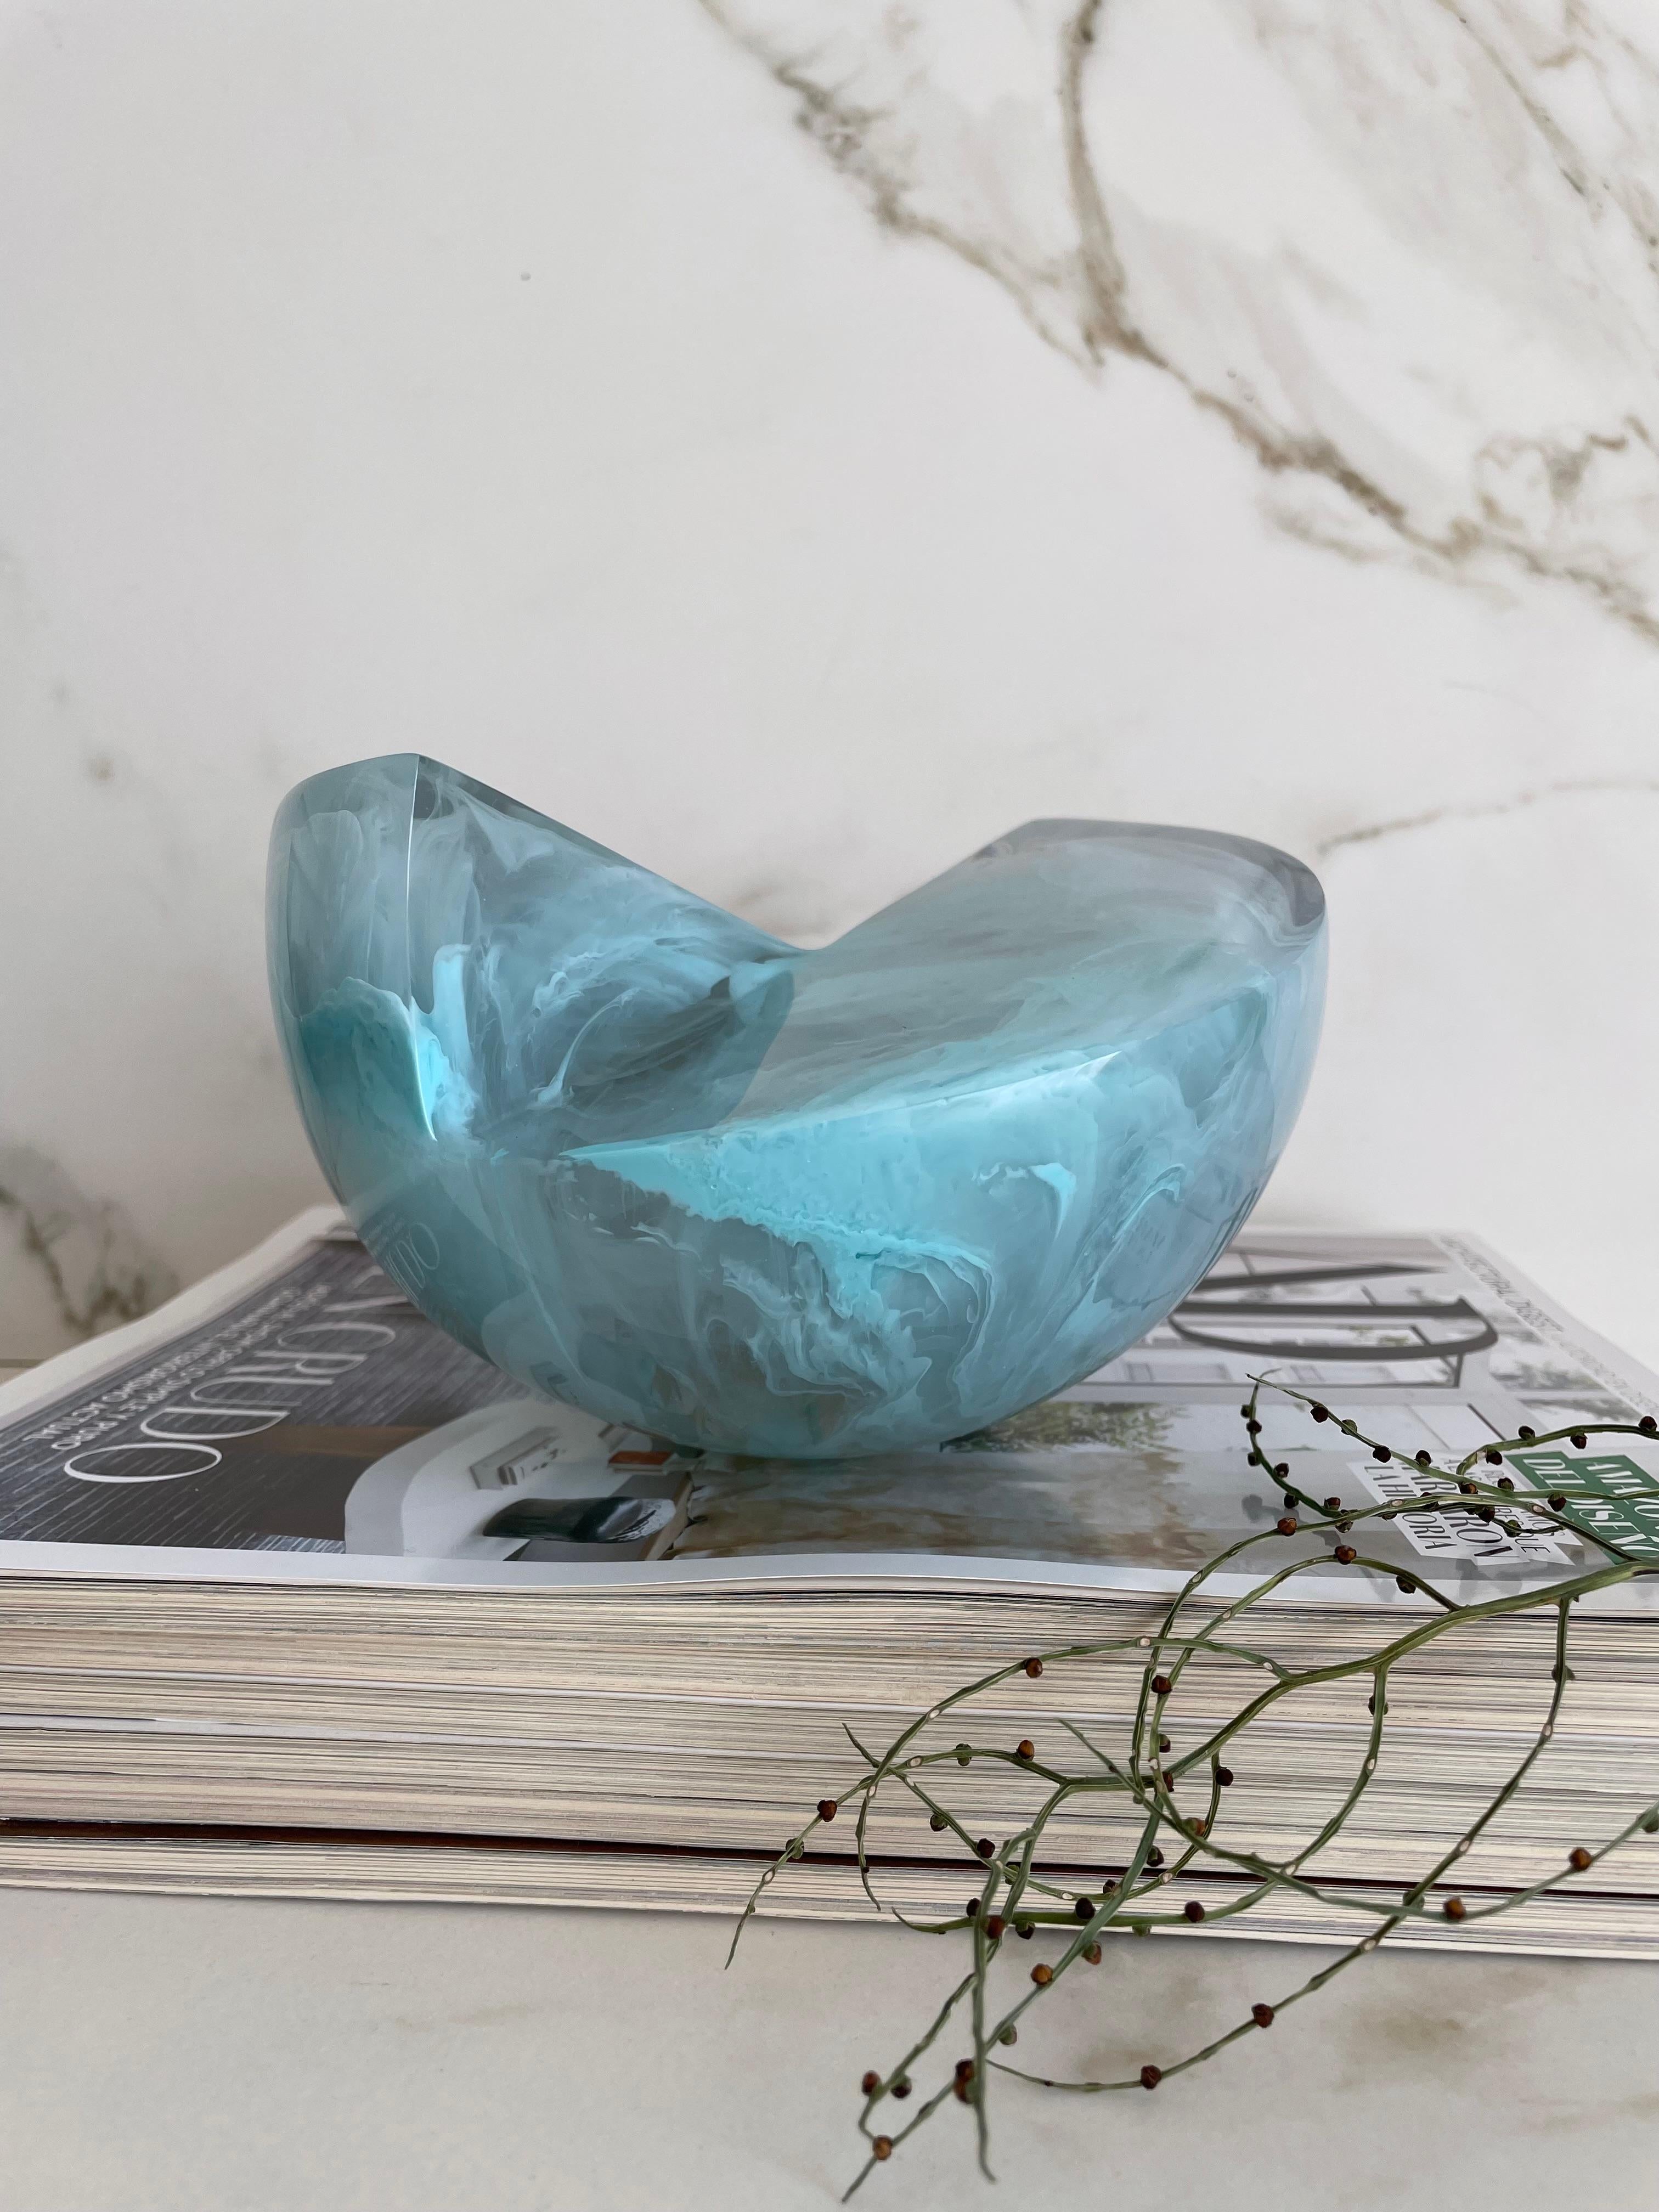 This Geometric sculpture is handmade in polished resin in a variety of colors. It is a modern and colorful piece that will liven up any space.

Our Semi Sphere is a very cool and fun piece! It can be transformed into a complete sphere when you place